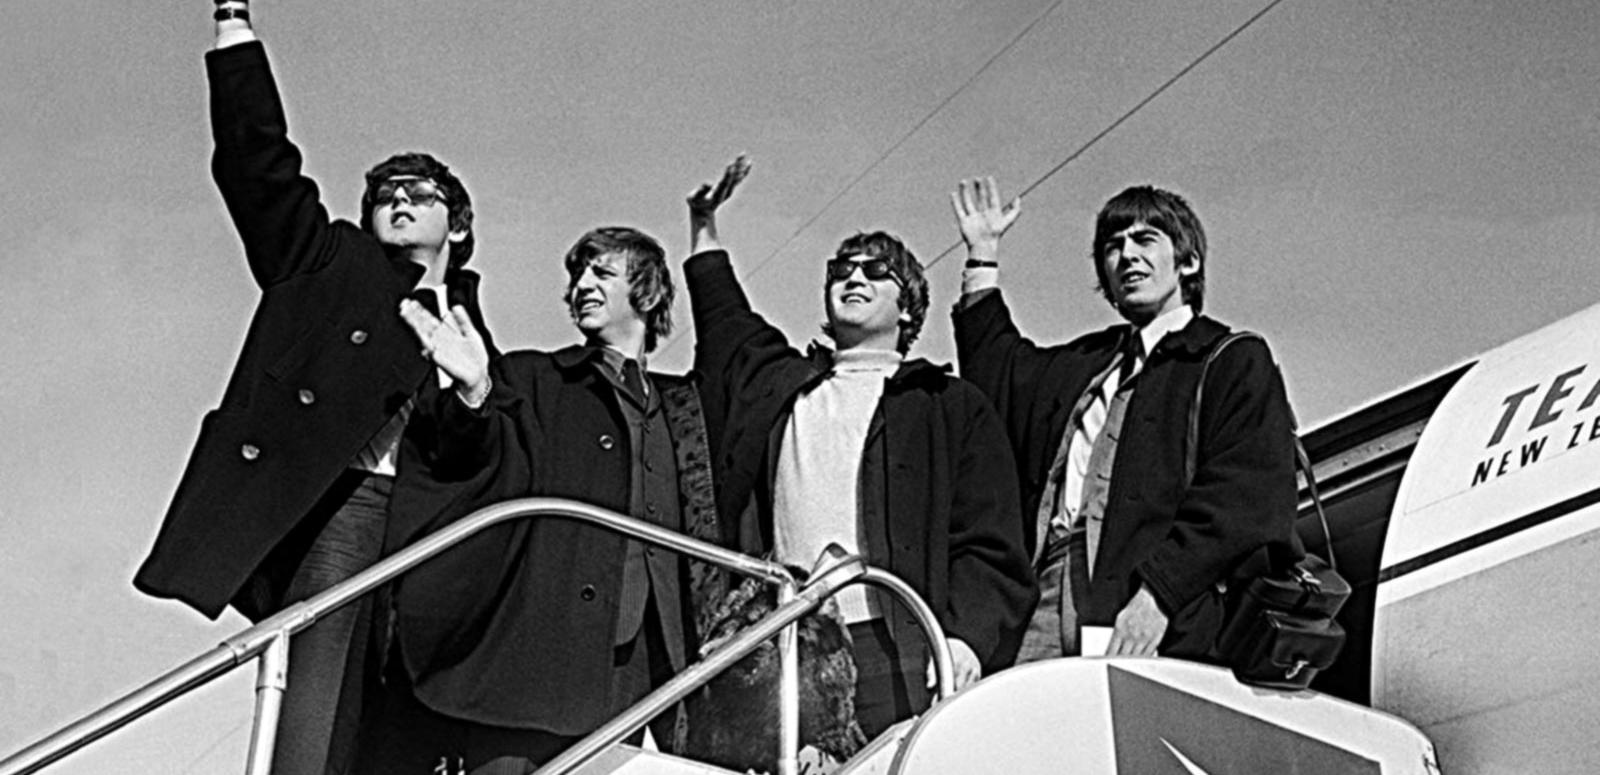 The Beatles (from left to right: Paul McCartney, Ringo Starr, John Lennon, George Harrison) wave to crowds in Sydney as they prepare to board a plane to New Zealand in June 1964.